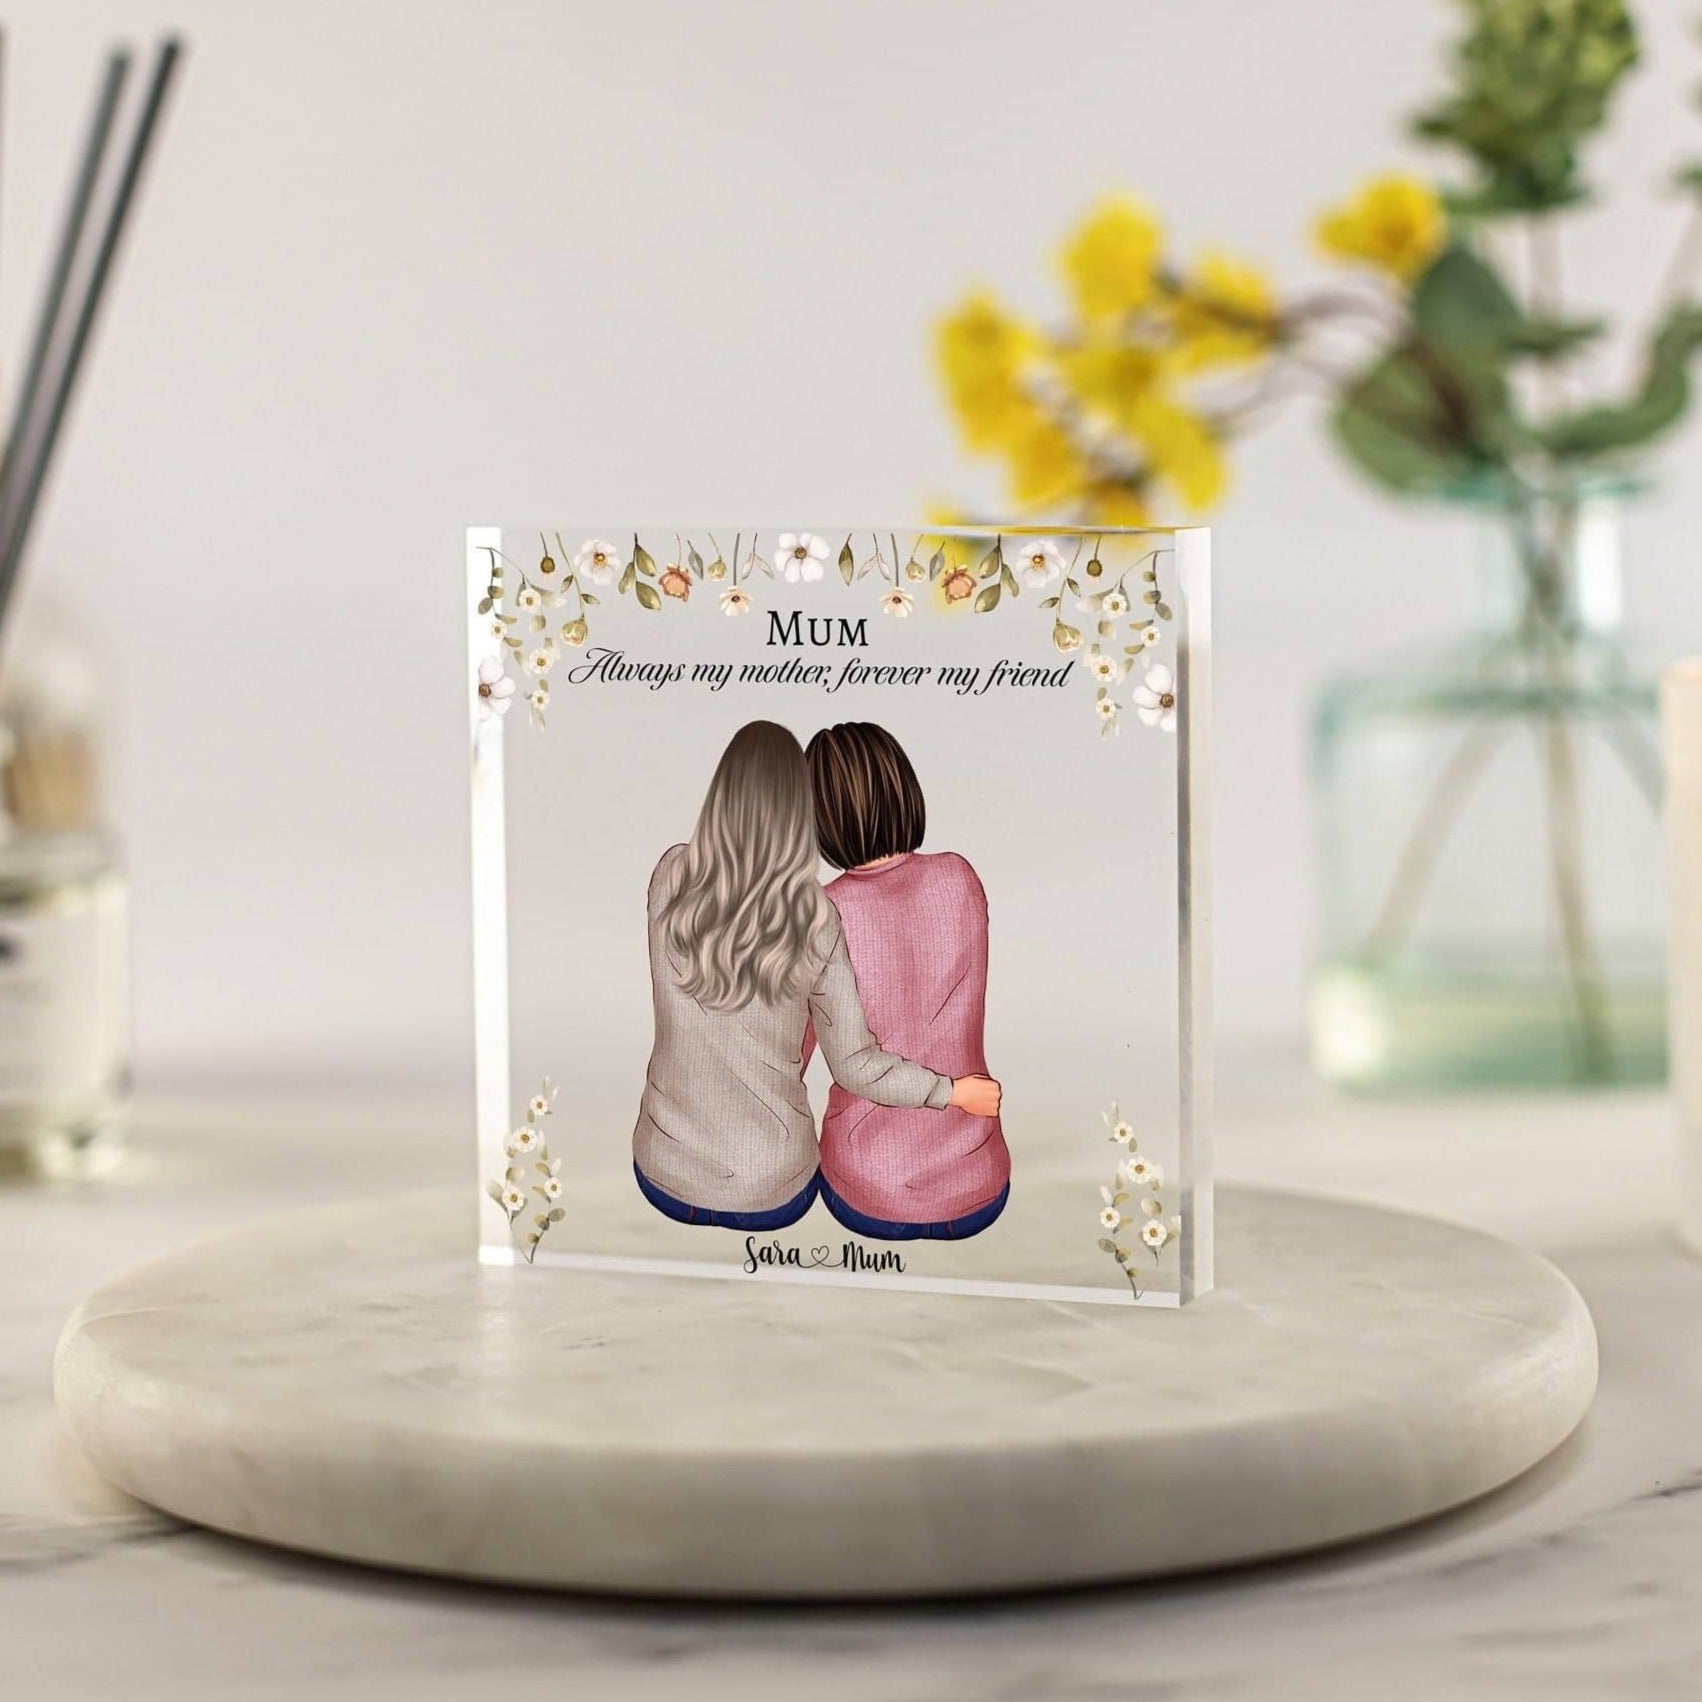 Always my mother forever my friend acrylic plaque mother and daughter custom portrait print. Personalised gift for mom for christmas birthday mothers day